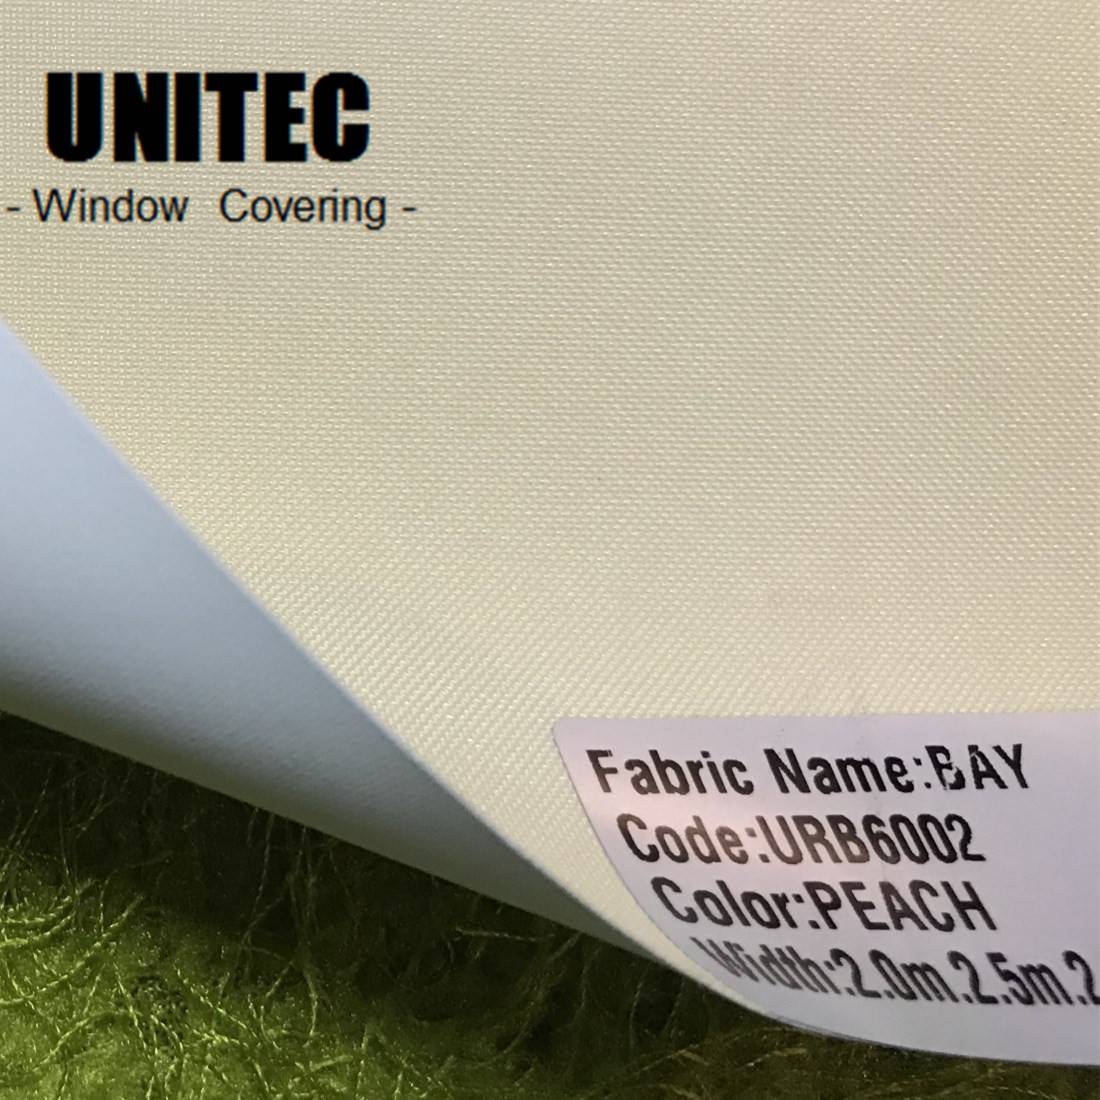 Factory Outlets India Patterned Roller Blinds Fabric -
 Blinds of Sale America 100% Polyester Roller Blackout UNITEC URB6002 PEACH – UNITEC